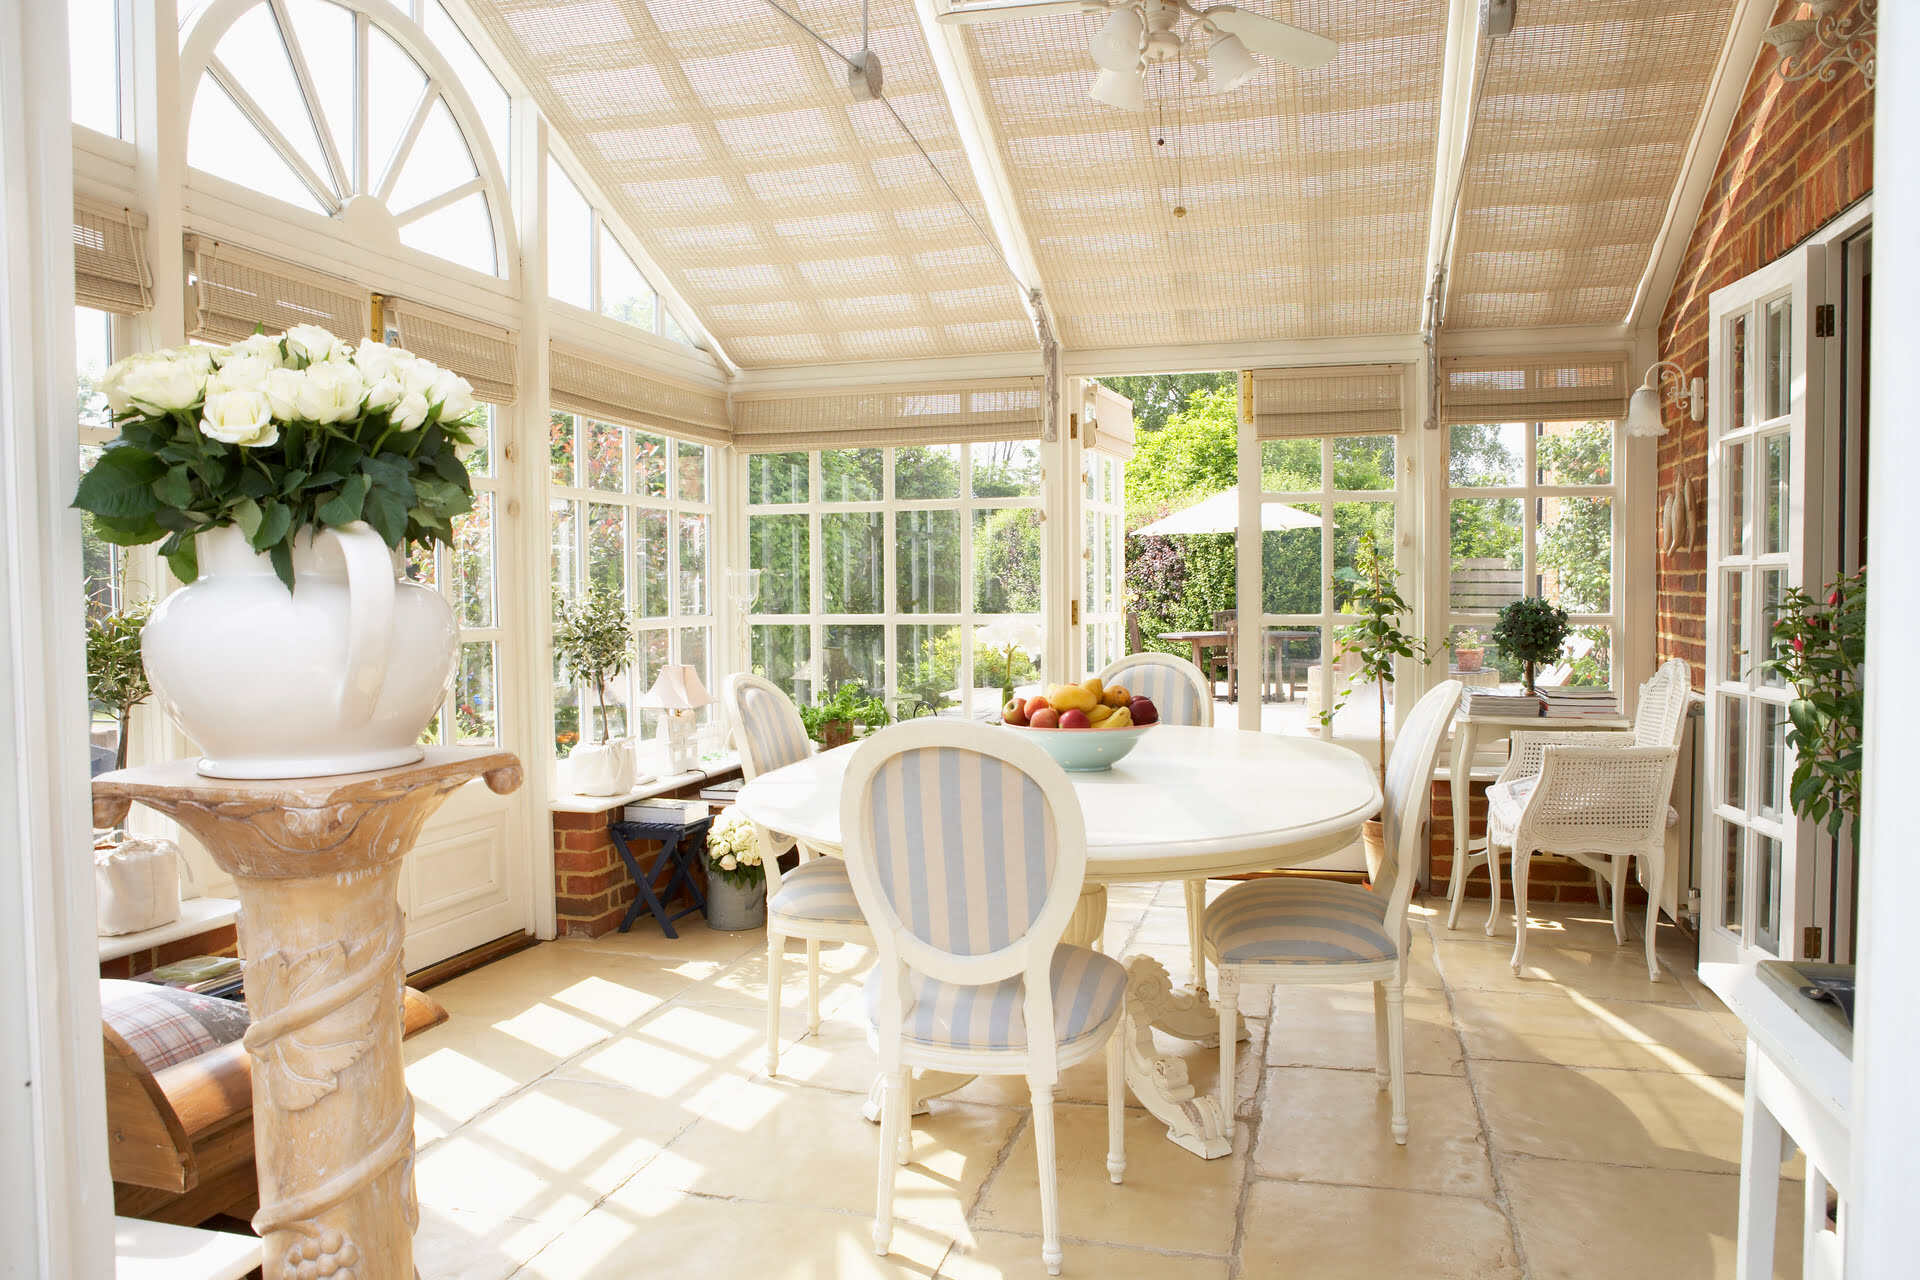 How To Convert Porch To Sunroom